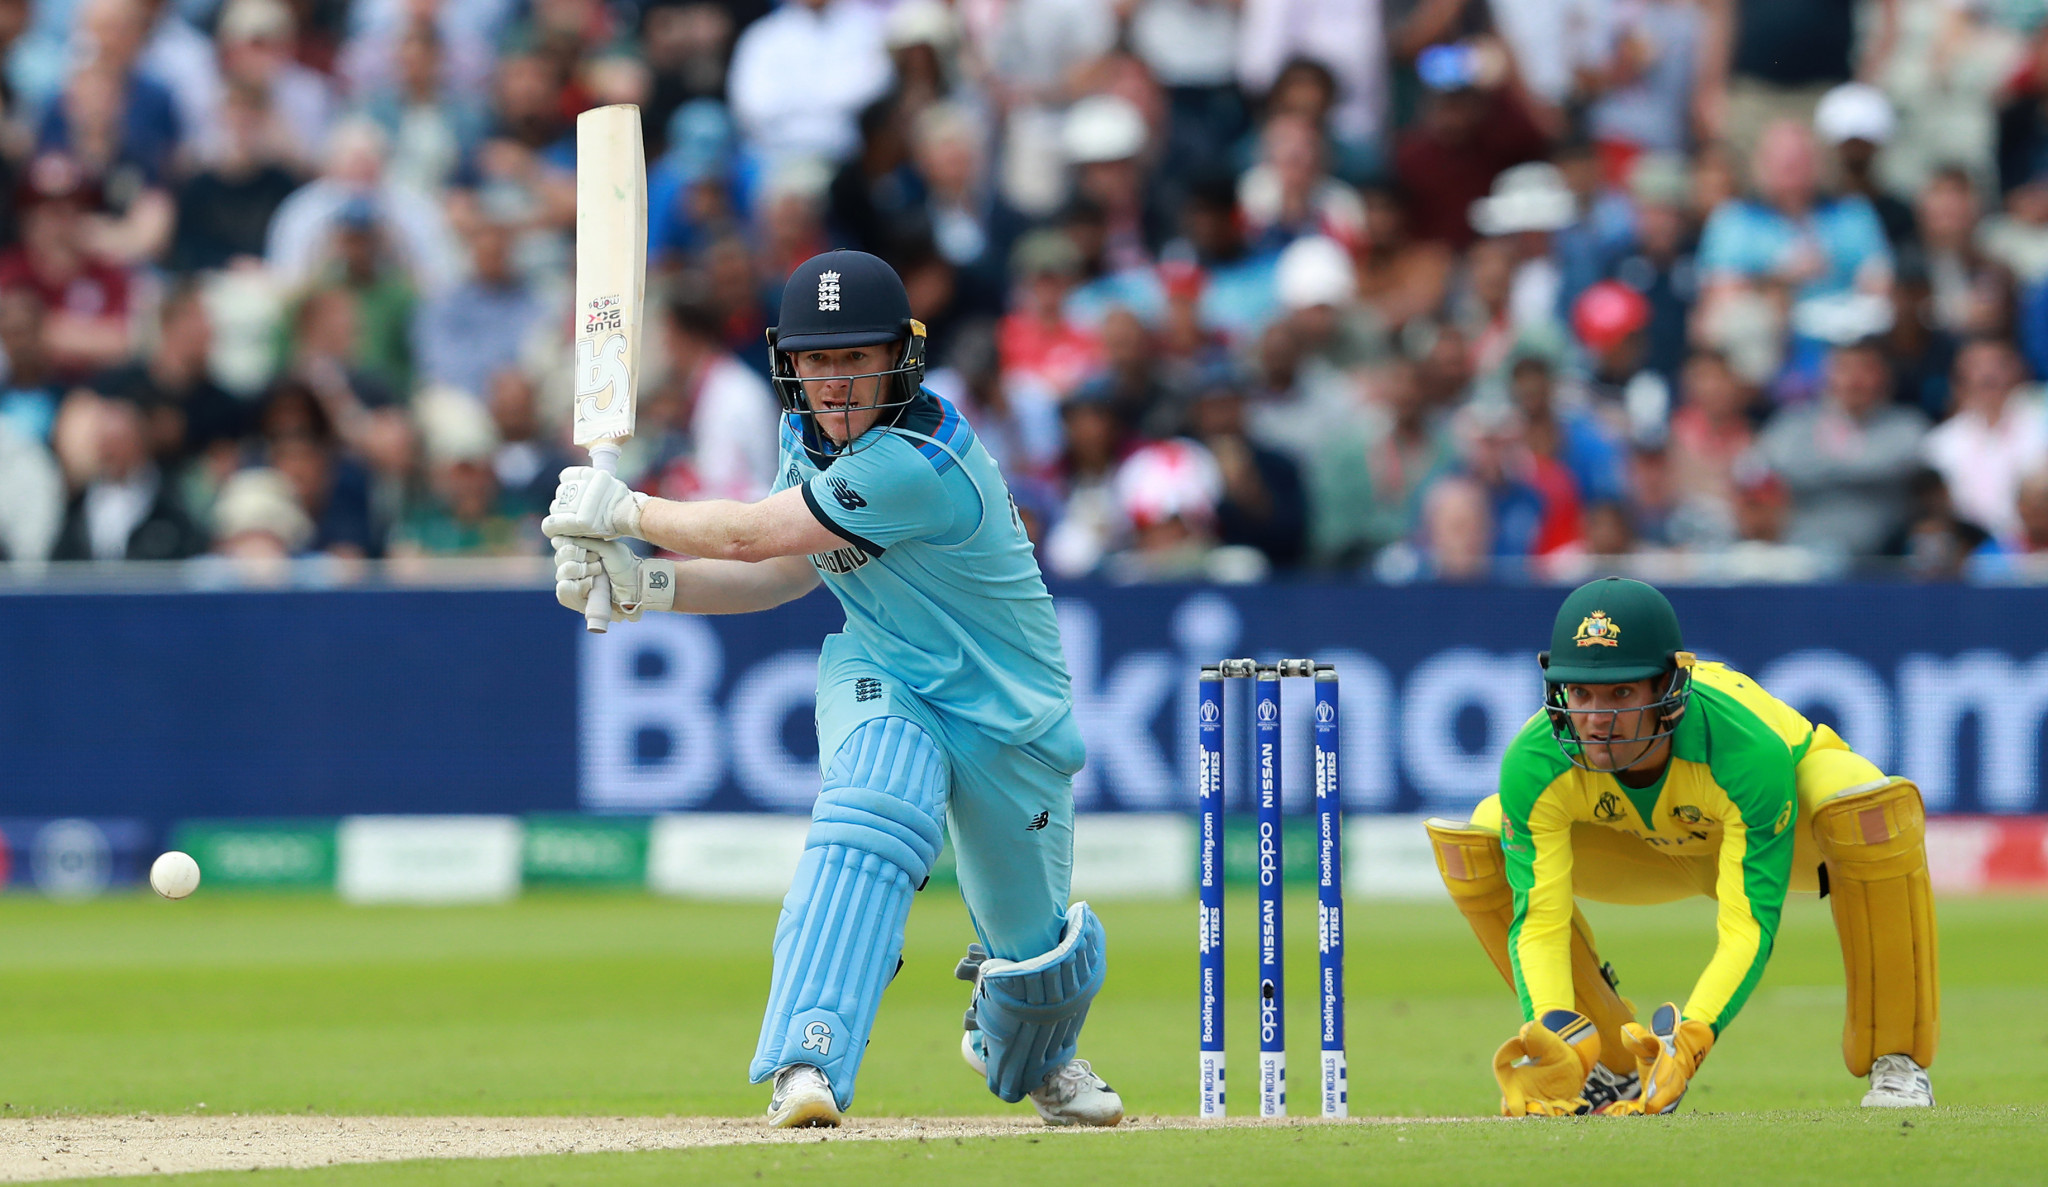 Birmingham has hosted several competitions in recent years, including the 2019 Cricket World Cup ©Getty Images